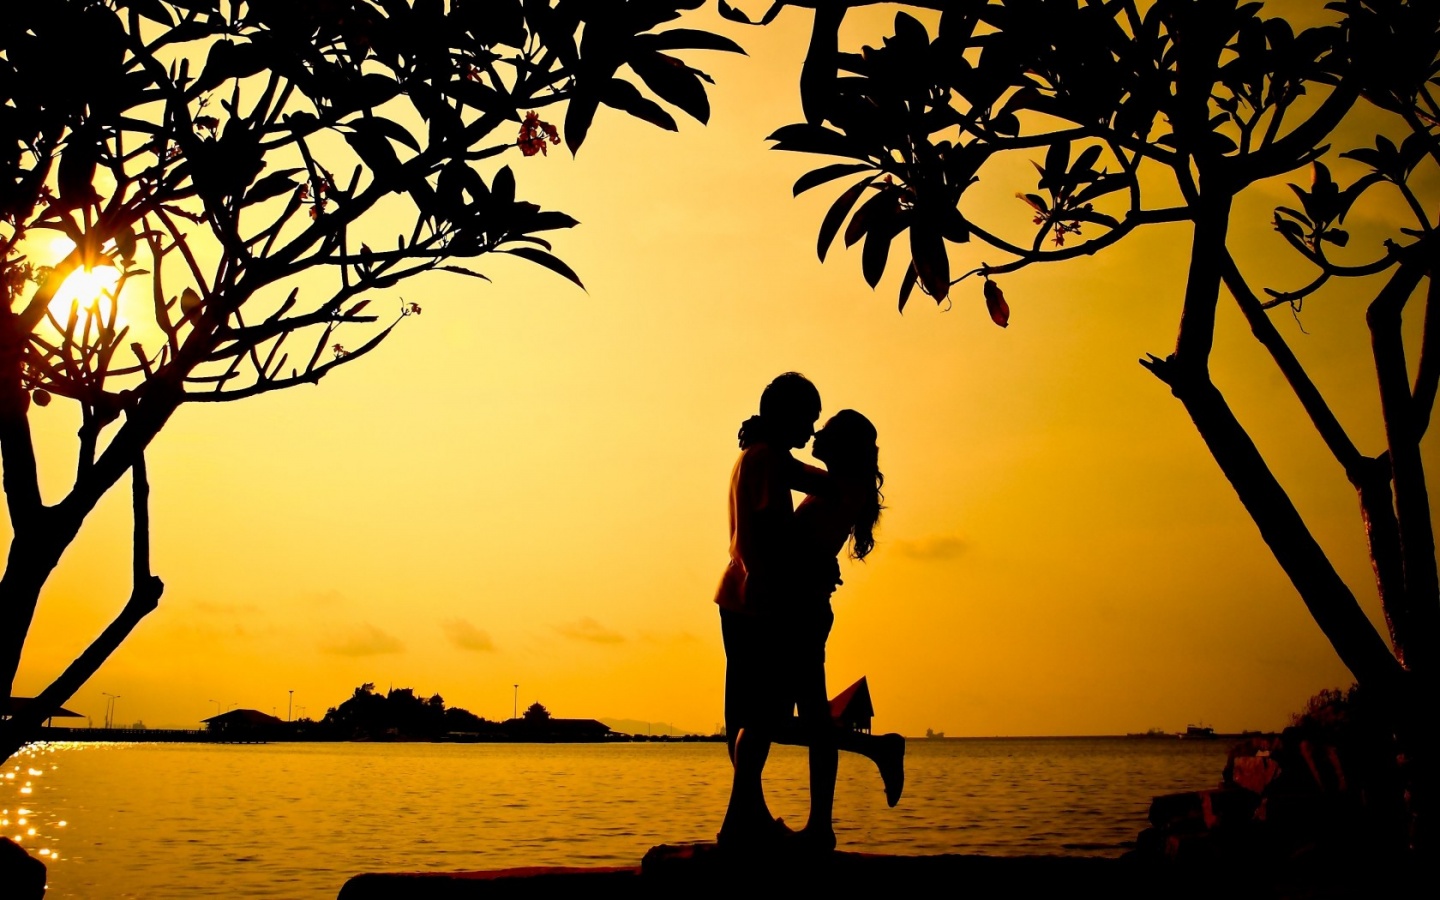 hug wallpaper download,people in nature,sky,tree,silhouette,sunset